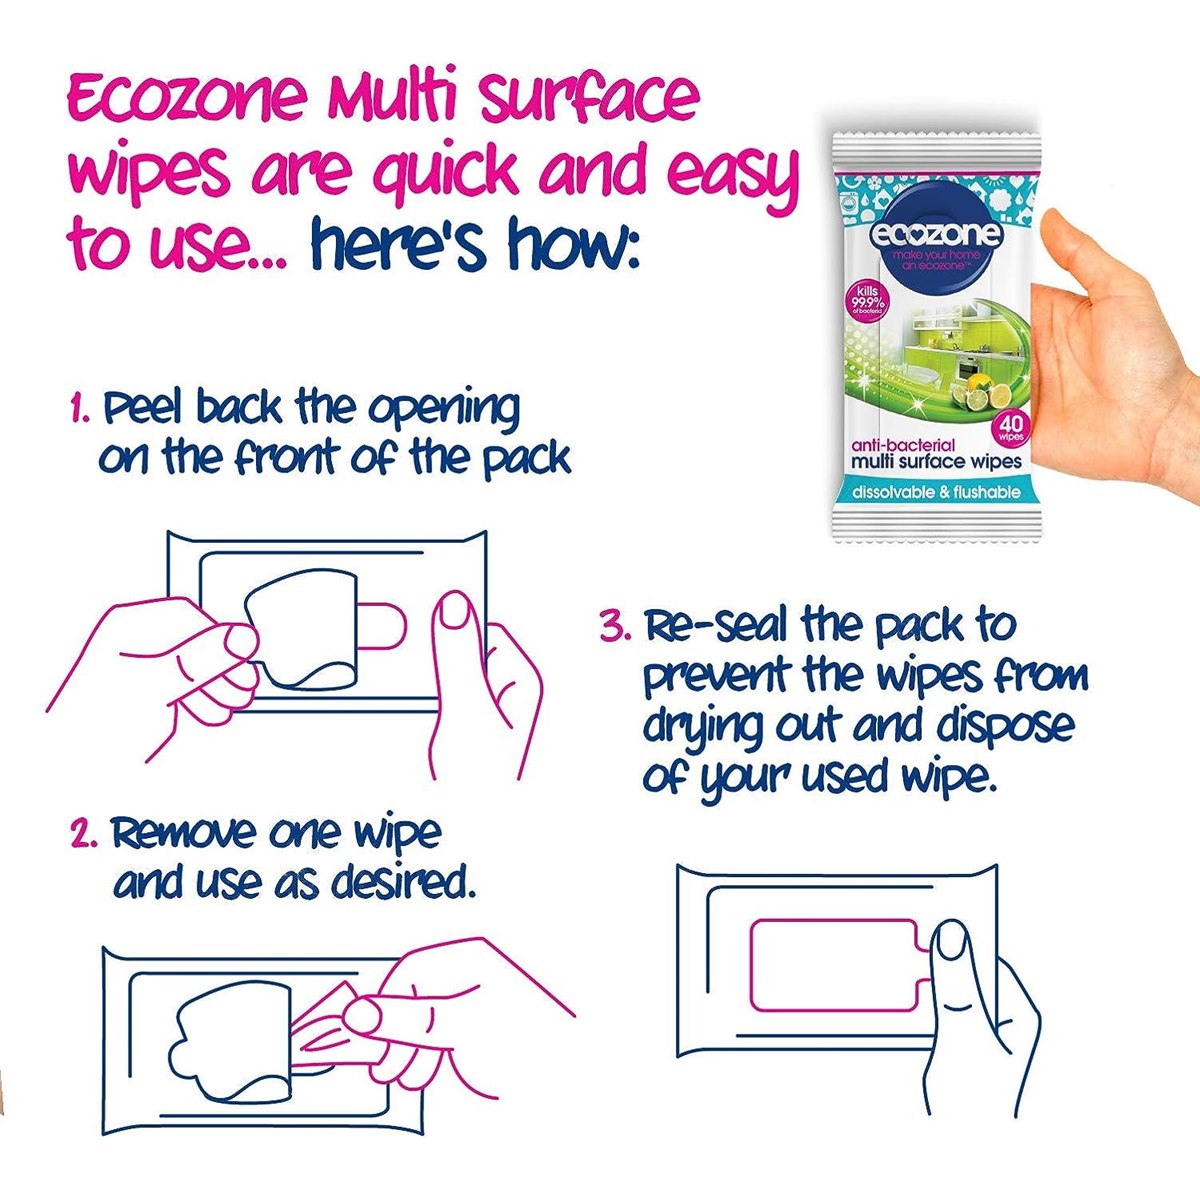 How to Use Ecozone Anti-Bacterial Wipes